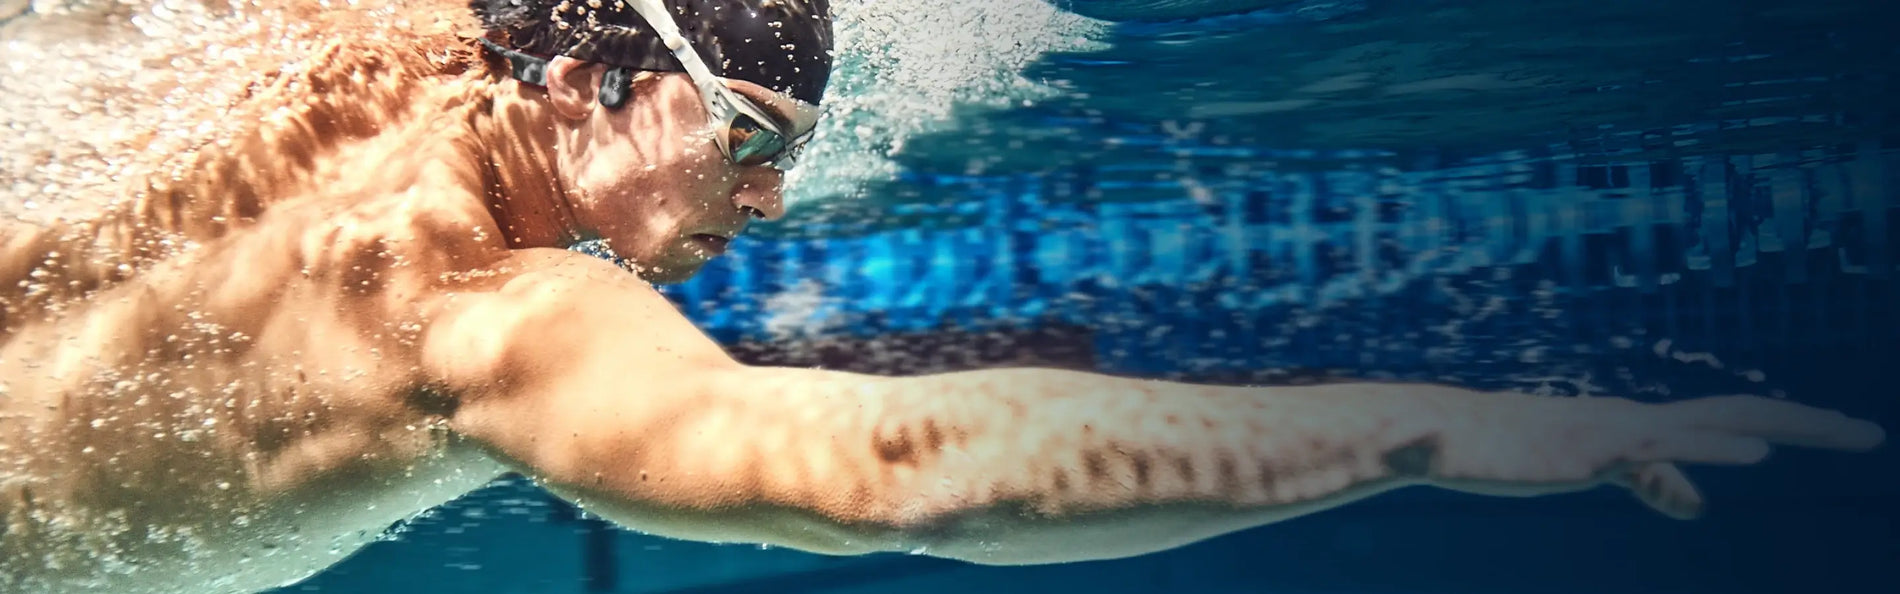 Shokz OpenSwim Review: Jumping in to the deep end